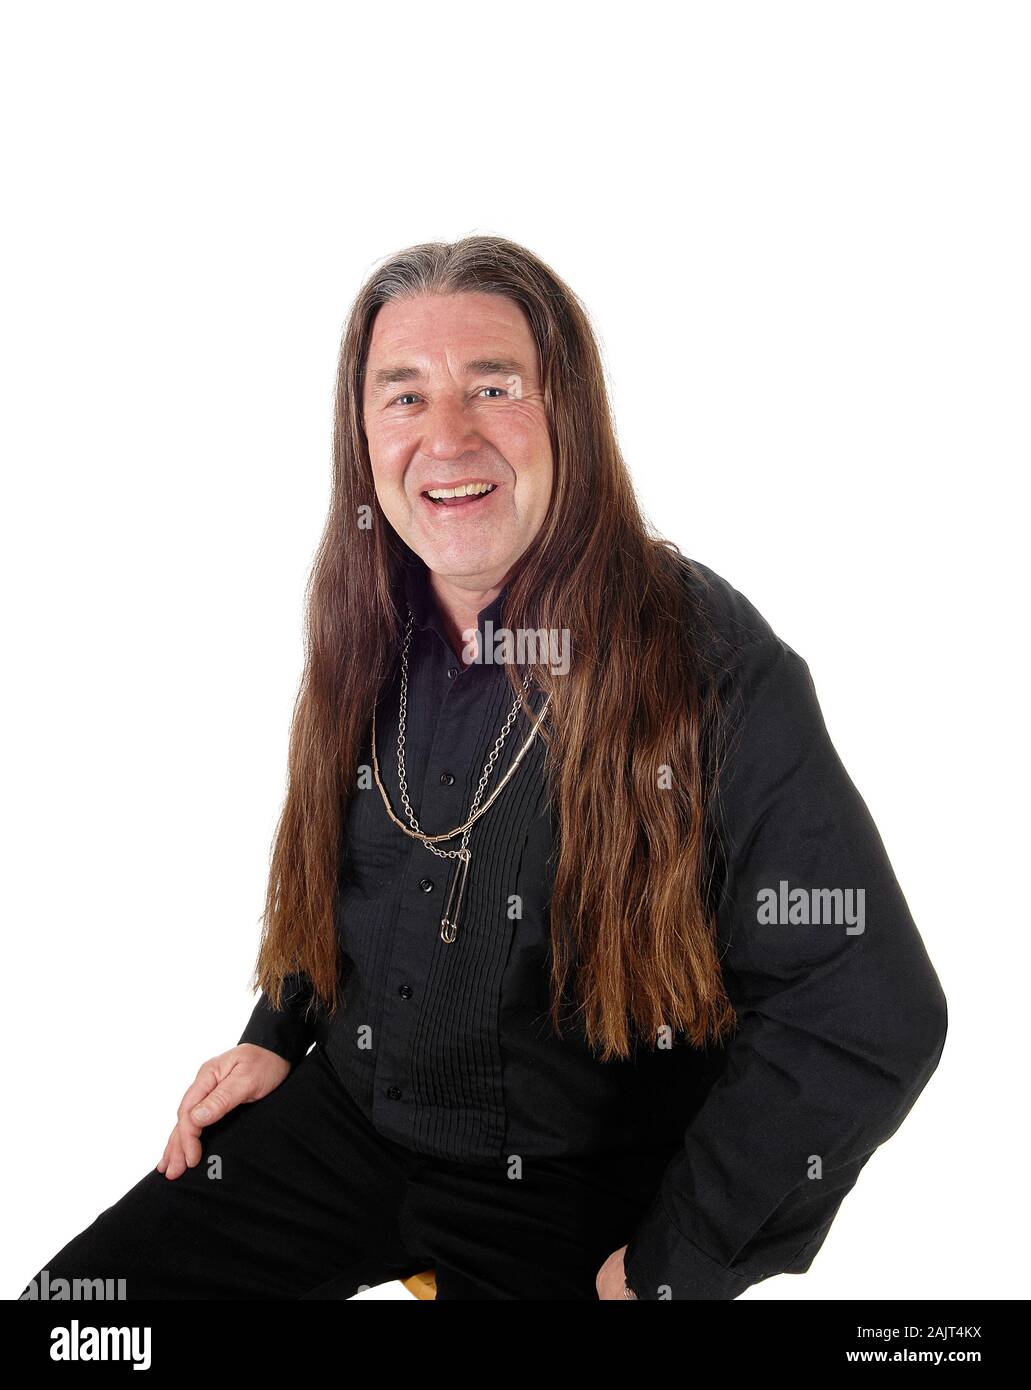 A middle age indigenous man in a portrait picture wearing a black shirt and jewellery with his long hair, isolated for white background Stock Photo